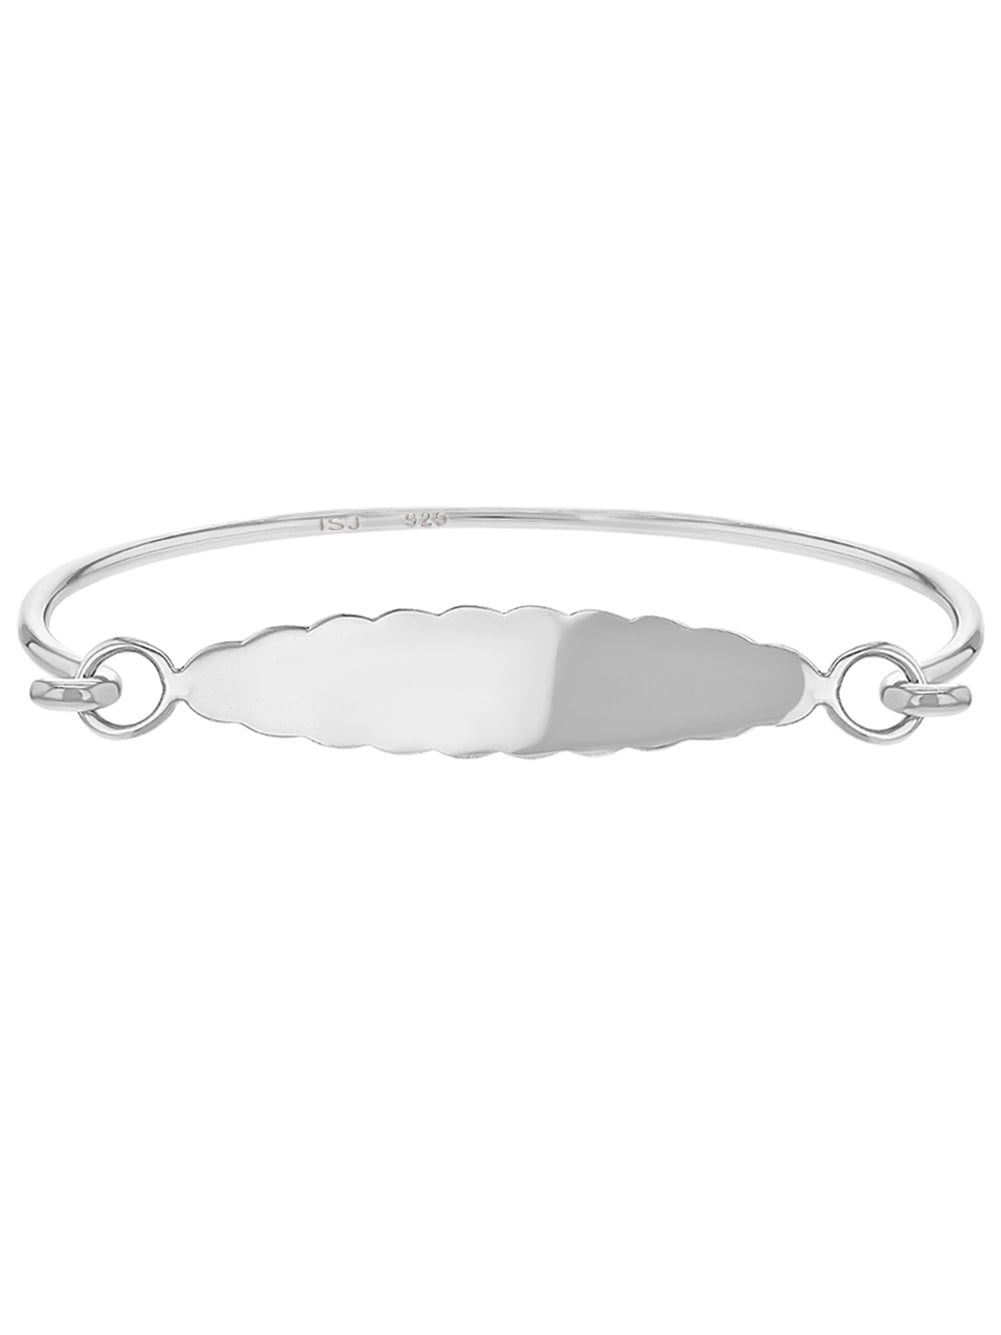 925 Sterling Silver Identification Oval Tag ID Bracelet for Children 5.5" 